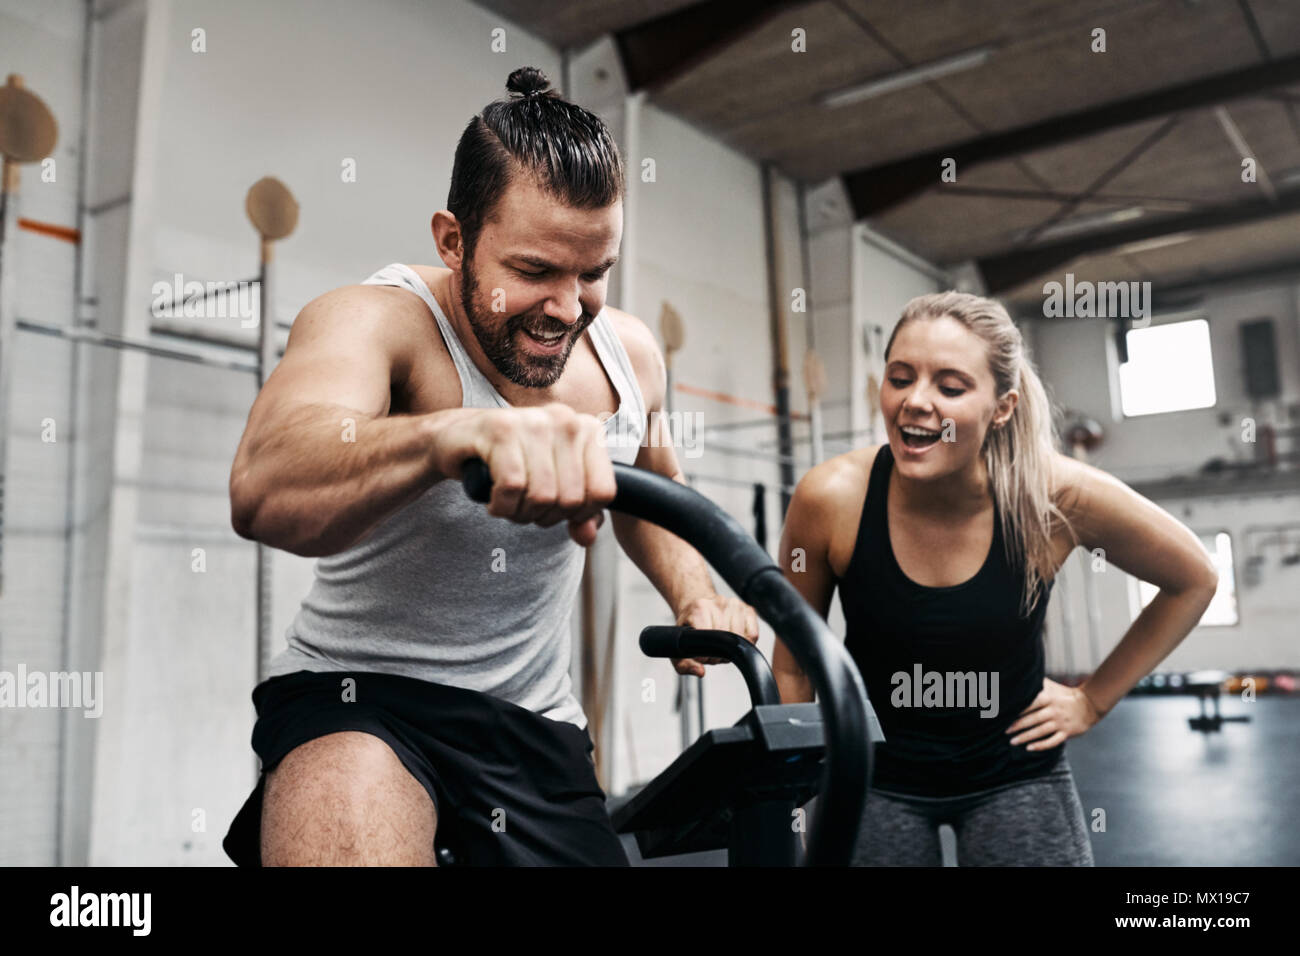 Smiling young woman cheering on her male friend riding a stationary bike during a workout session together at the gym Stock Photo